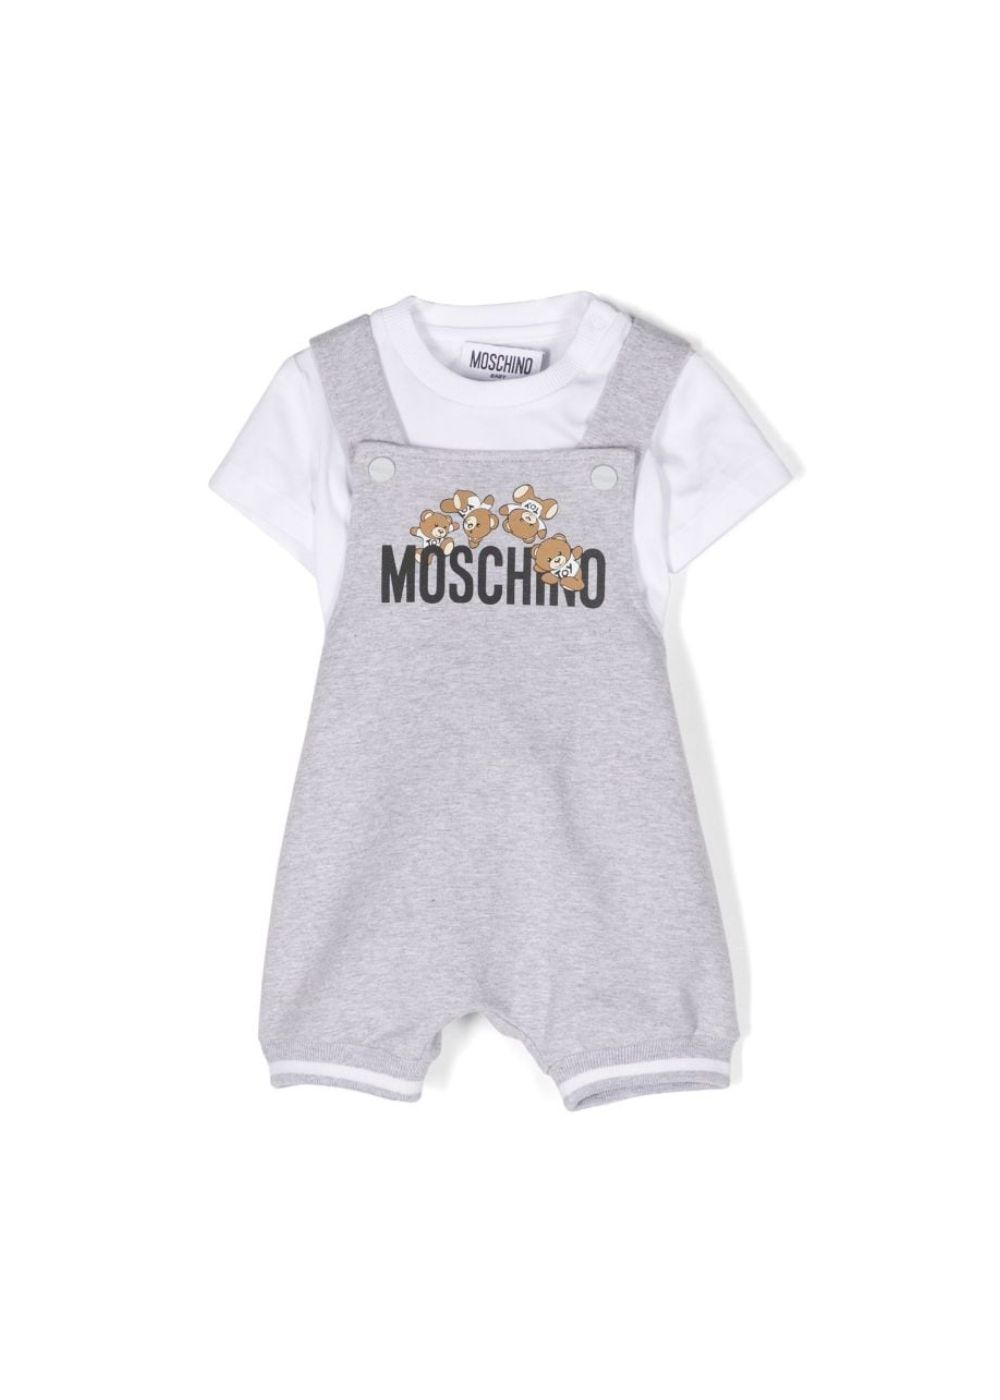 Featured image for “Moschino Pagliaccetto Set salopette Teddy Bear”